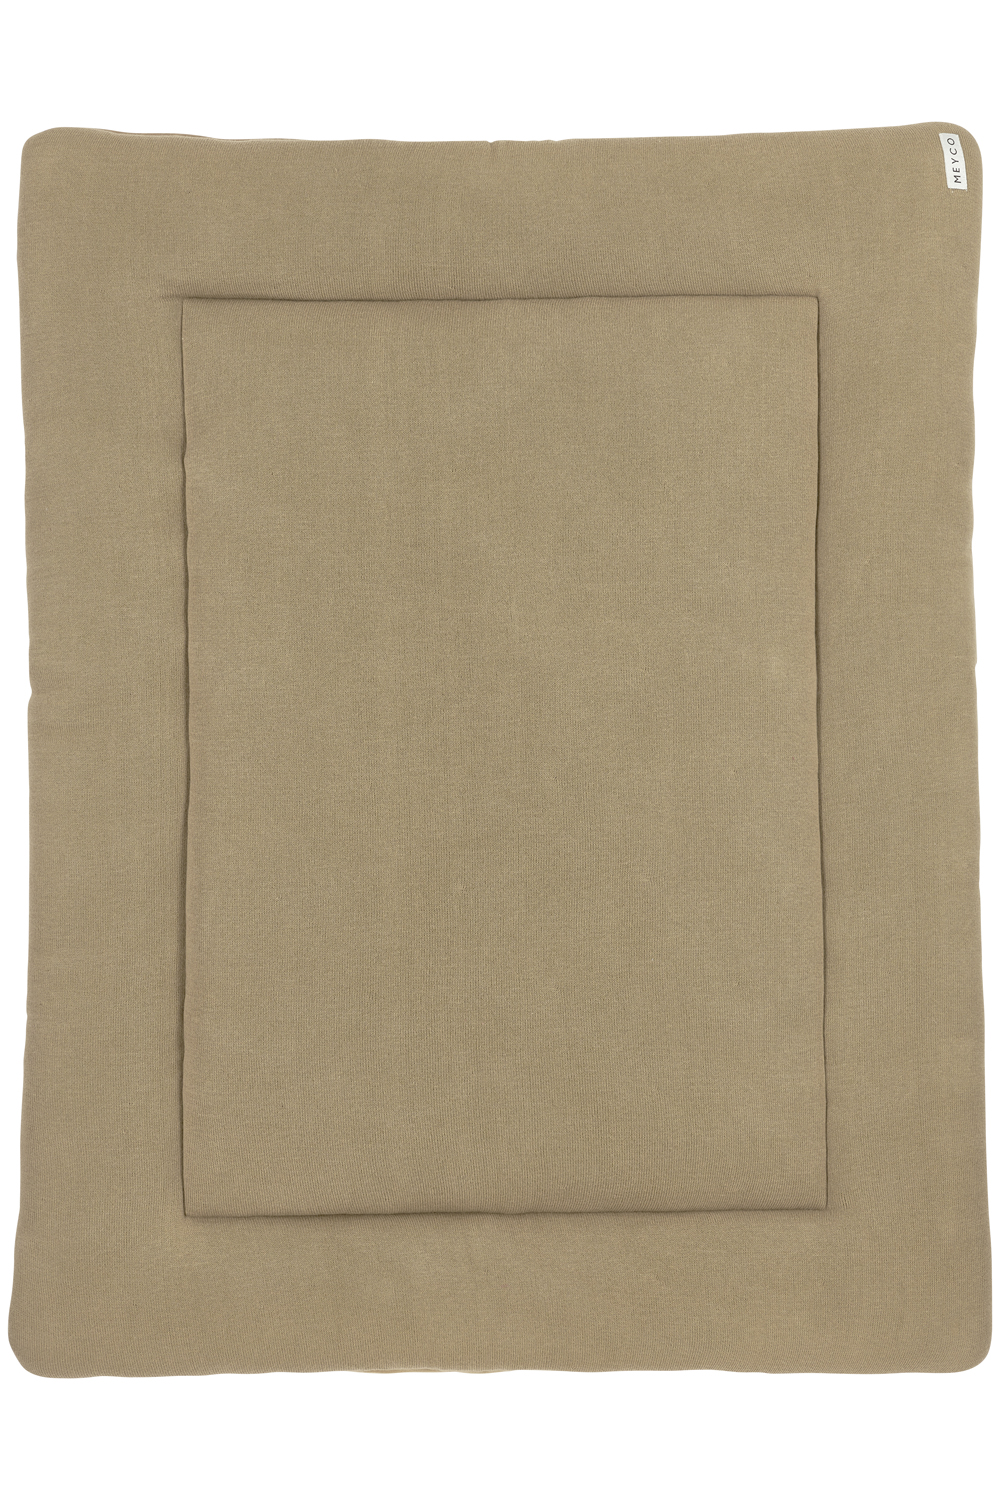 Boxkleed - taupe - 77x97cm